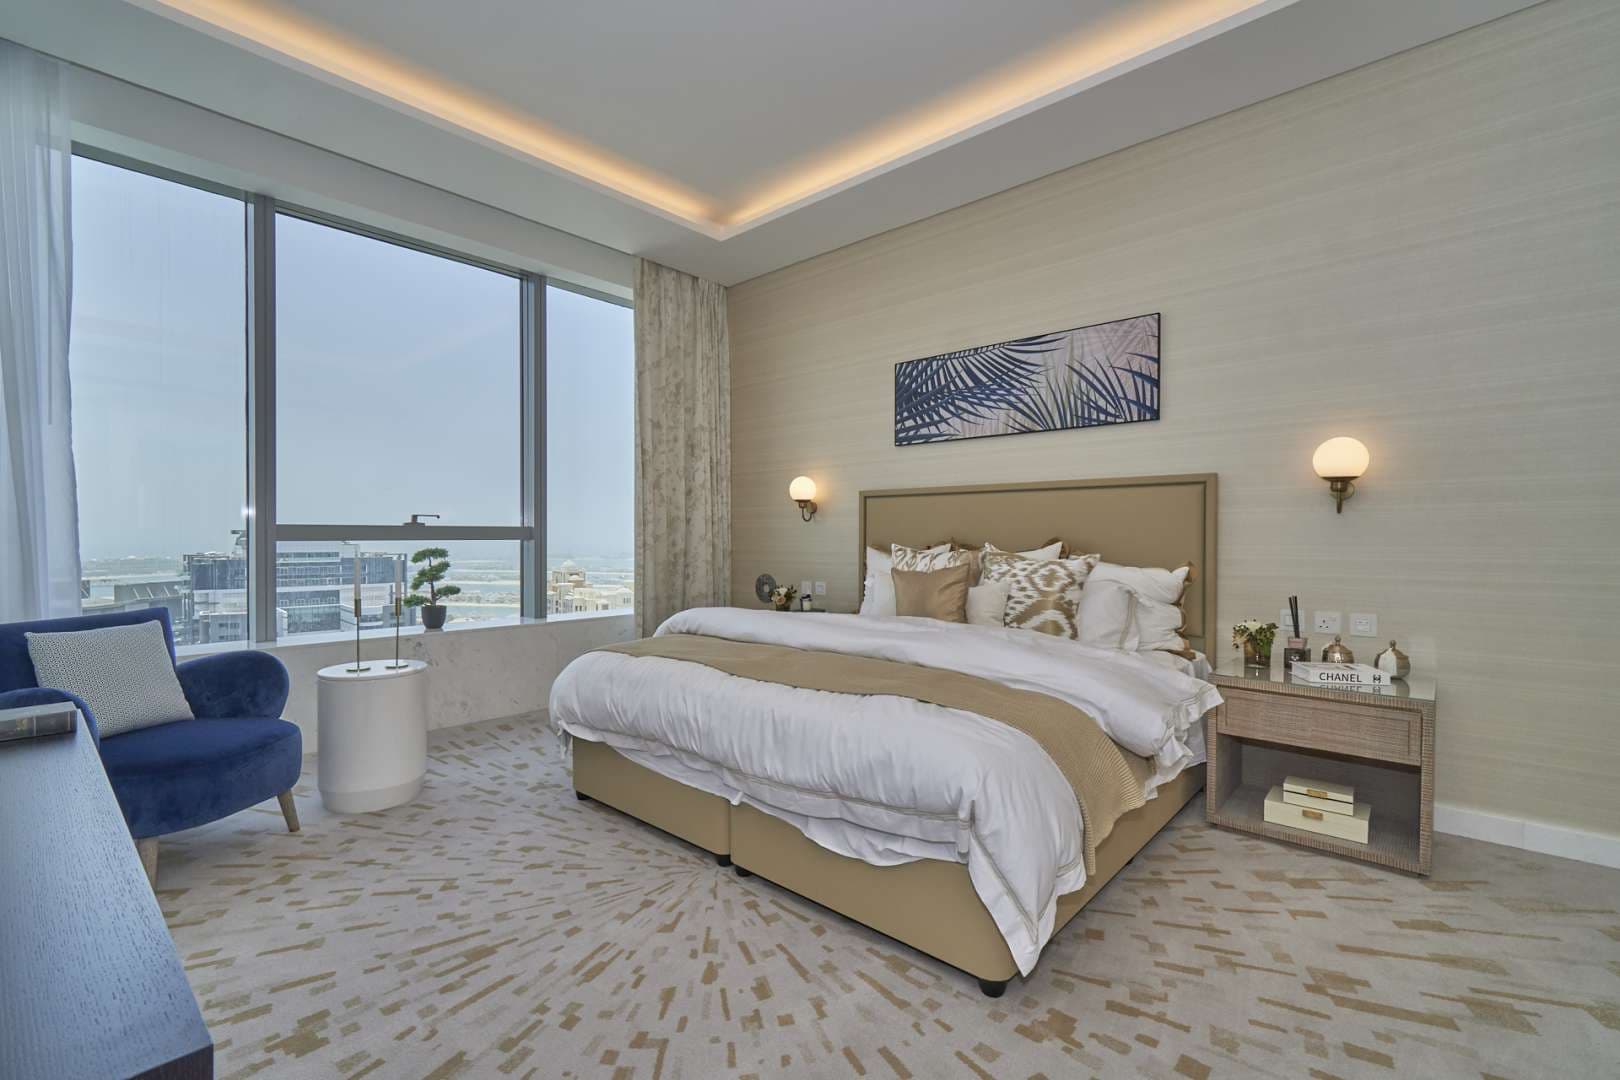 1 Bedroom Apartment For Sale The Palm Tower Lp07265 15dd0ac7b0822800.jpg